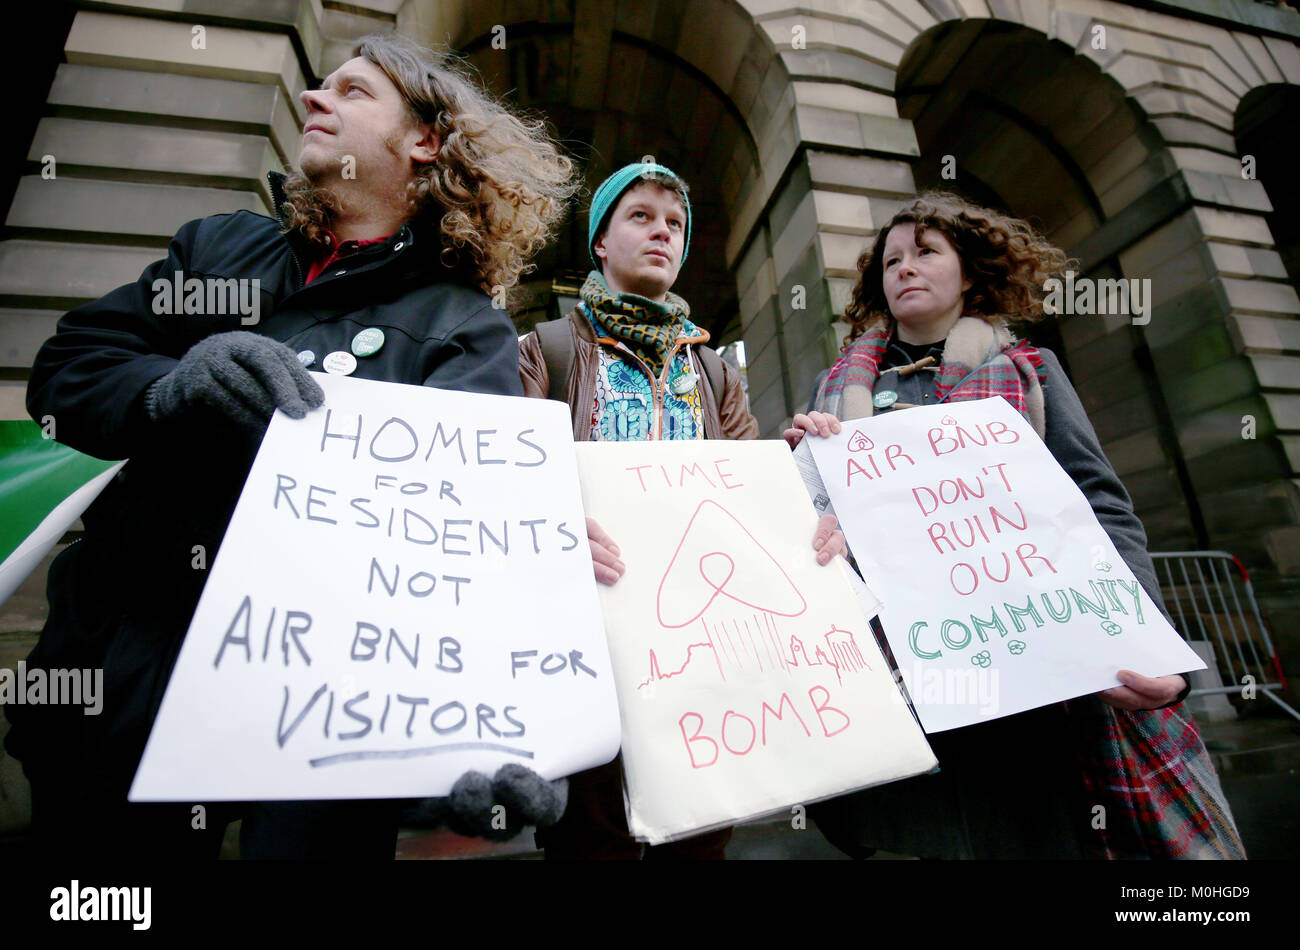 Members of Scotland's tenants' union Living Rent organised a protest outside the Edinburgh City Council Chamber to highlight concerns about the scarcity of housing which they claim is linked to Airbnb, and call upon the council to enforce tough restrictions on holiday lets. Stock Photo